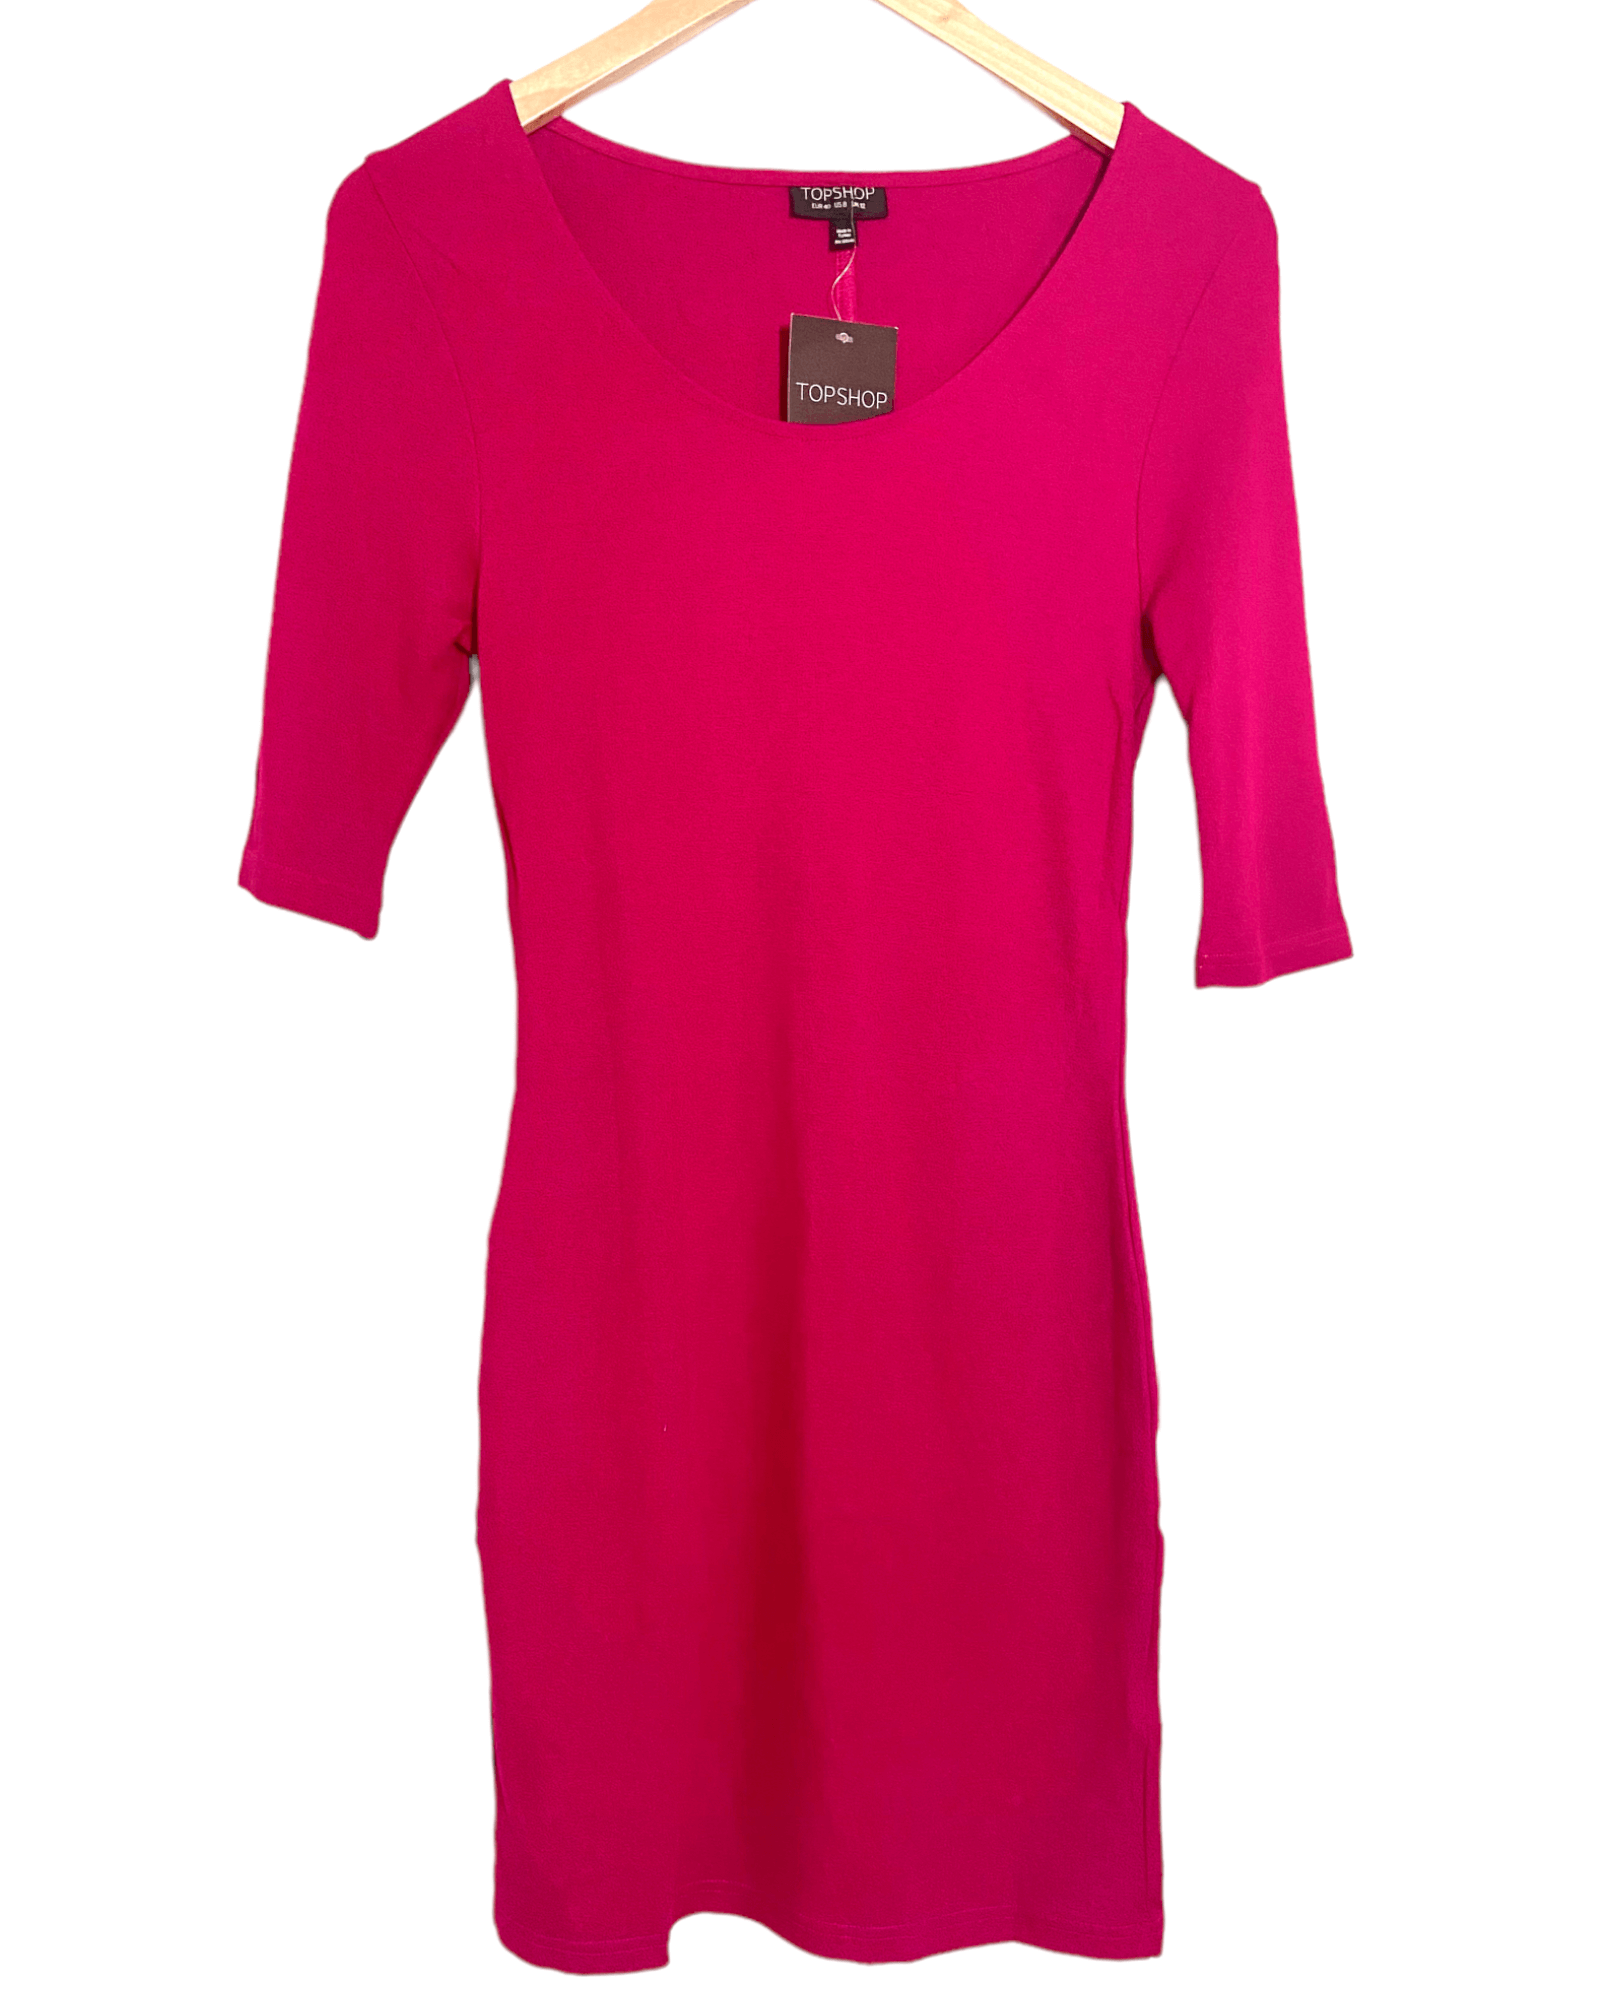 Cool Winter TOPSHOP berry pink bodycon dress